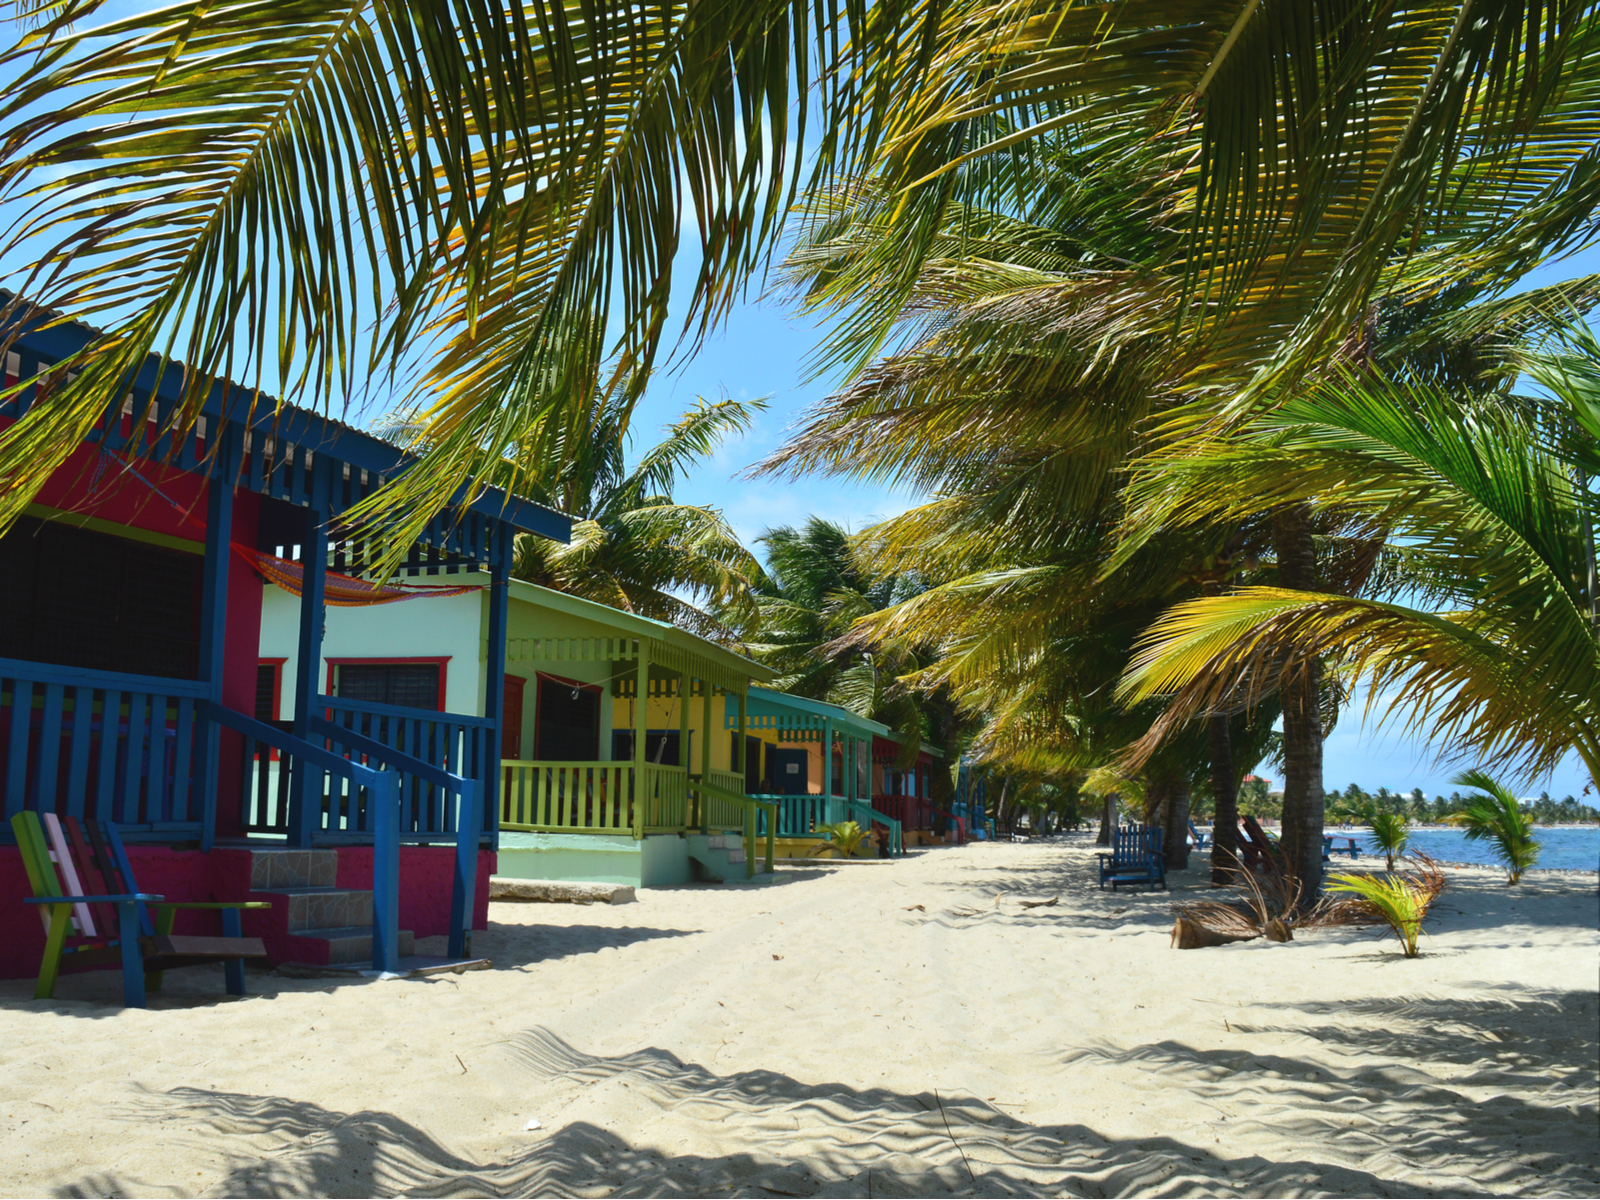 Placencia Peninsula's colorful cabins overlooking the beach and the ocean below palm trees